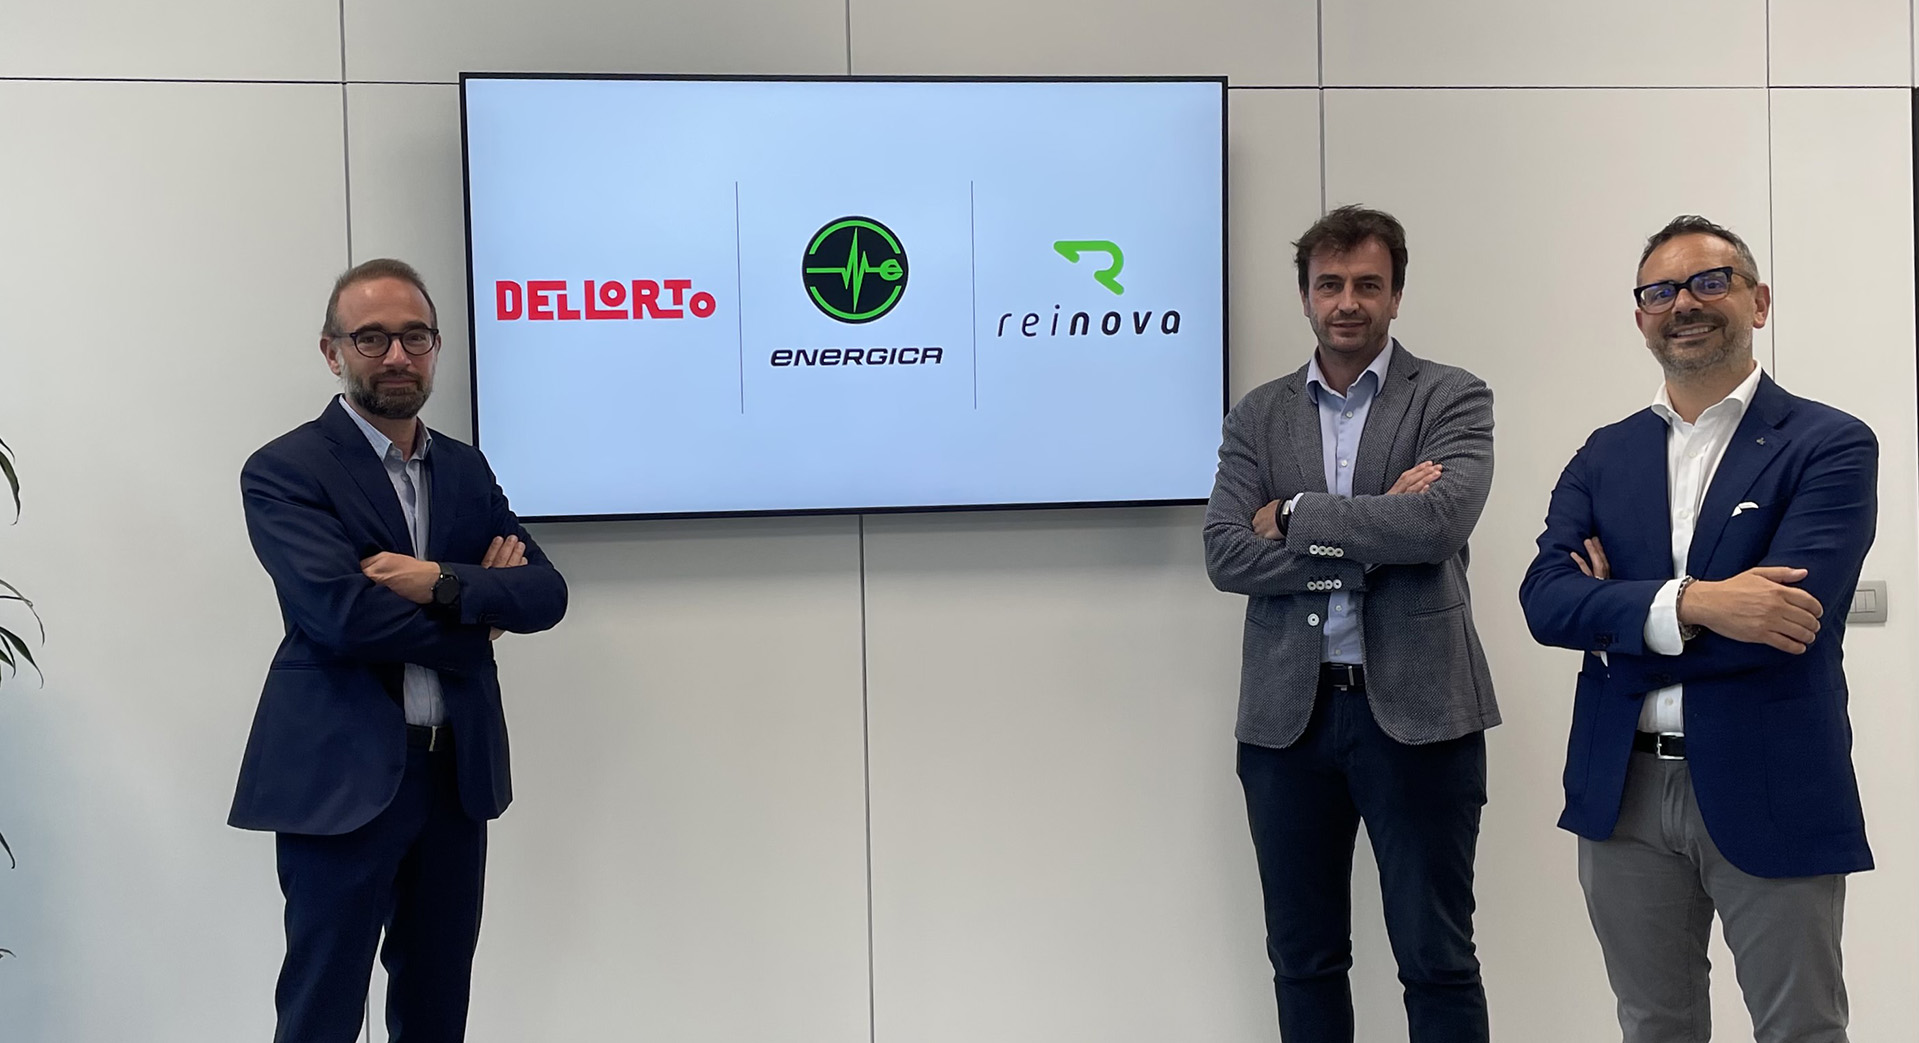 Dell’Orto S.p.A. and Energica Motor Company S.p.A. choose Reinova to continue the E-POWER project, strengthening services to OEMs and expanding the product range to complete the new approach to electric mobility